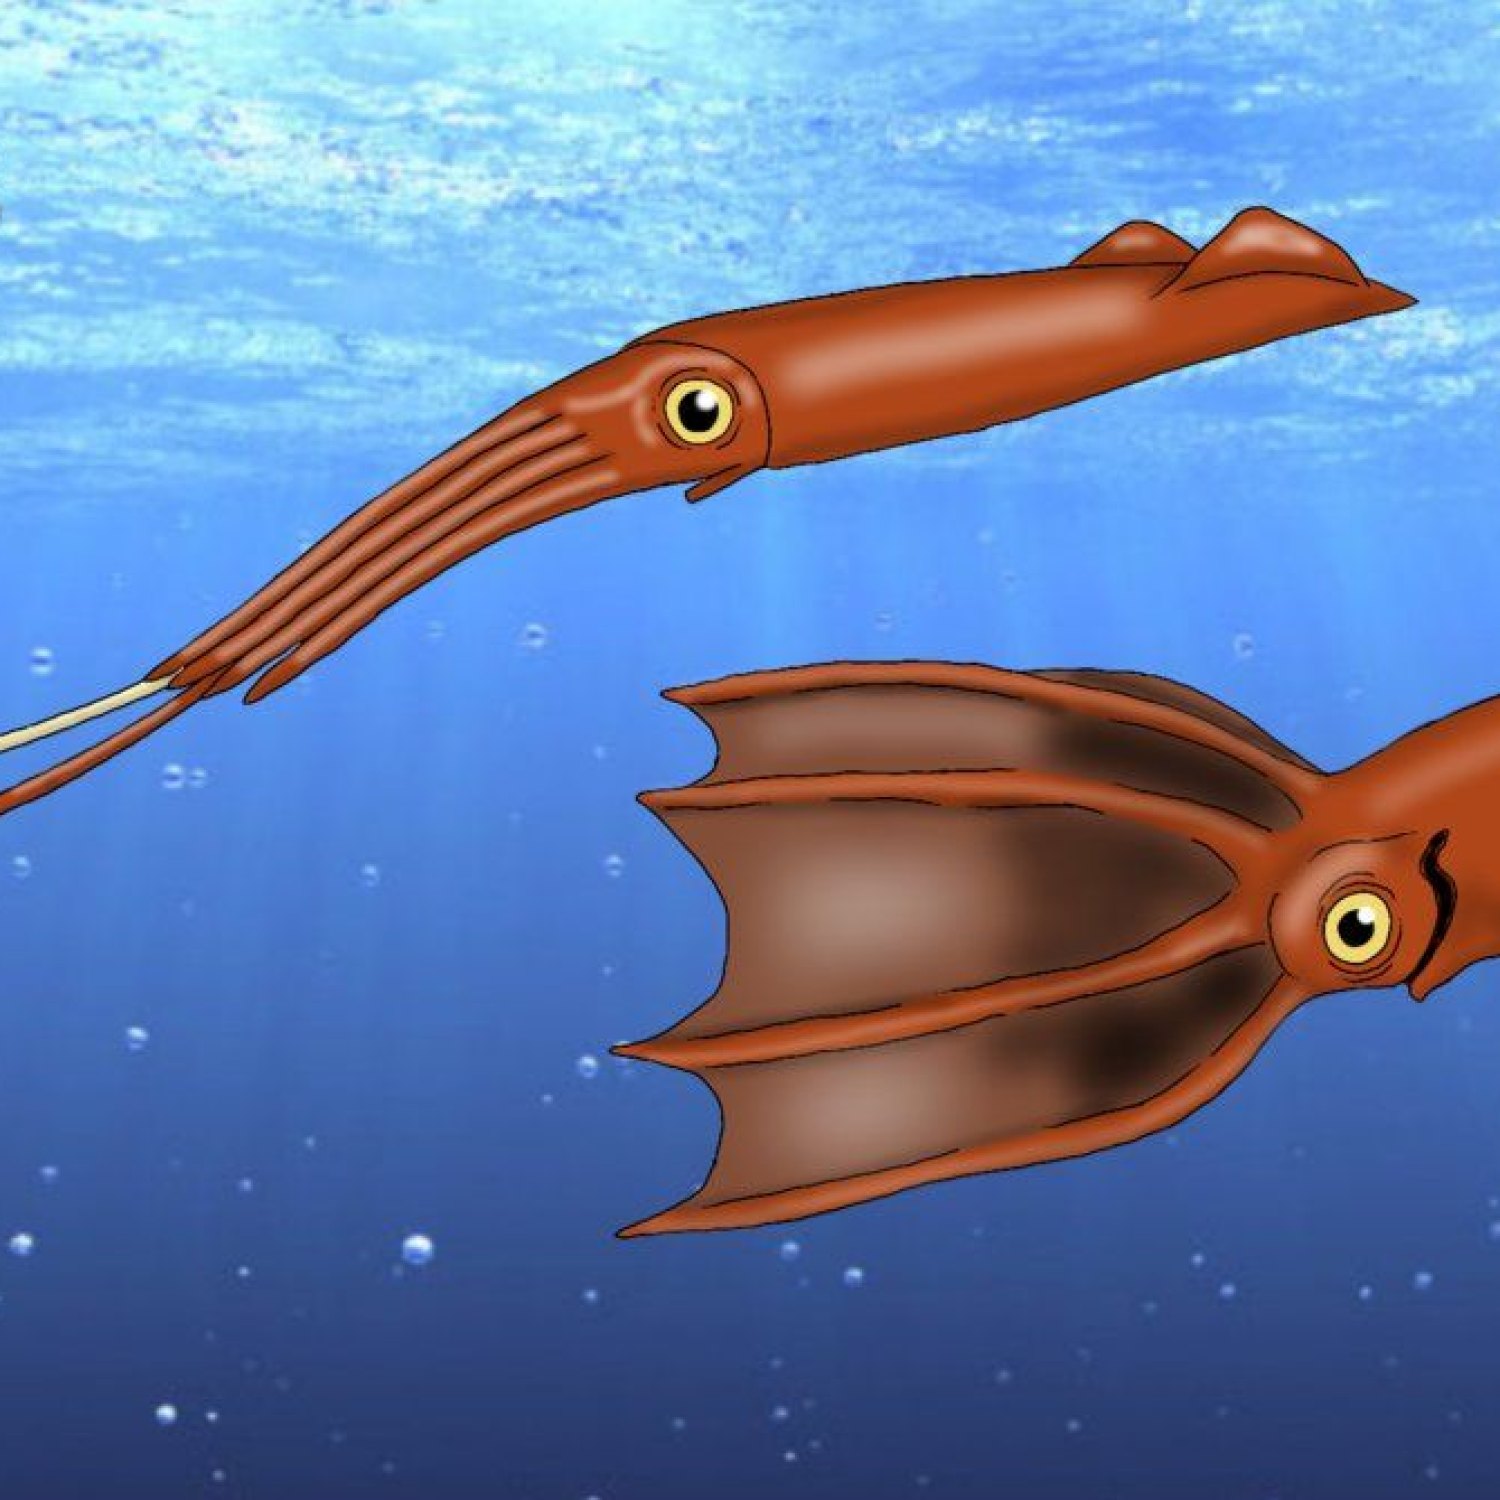 Tusoteuthis